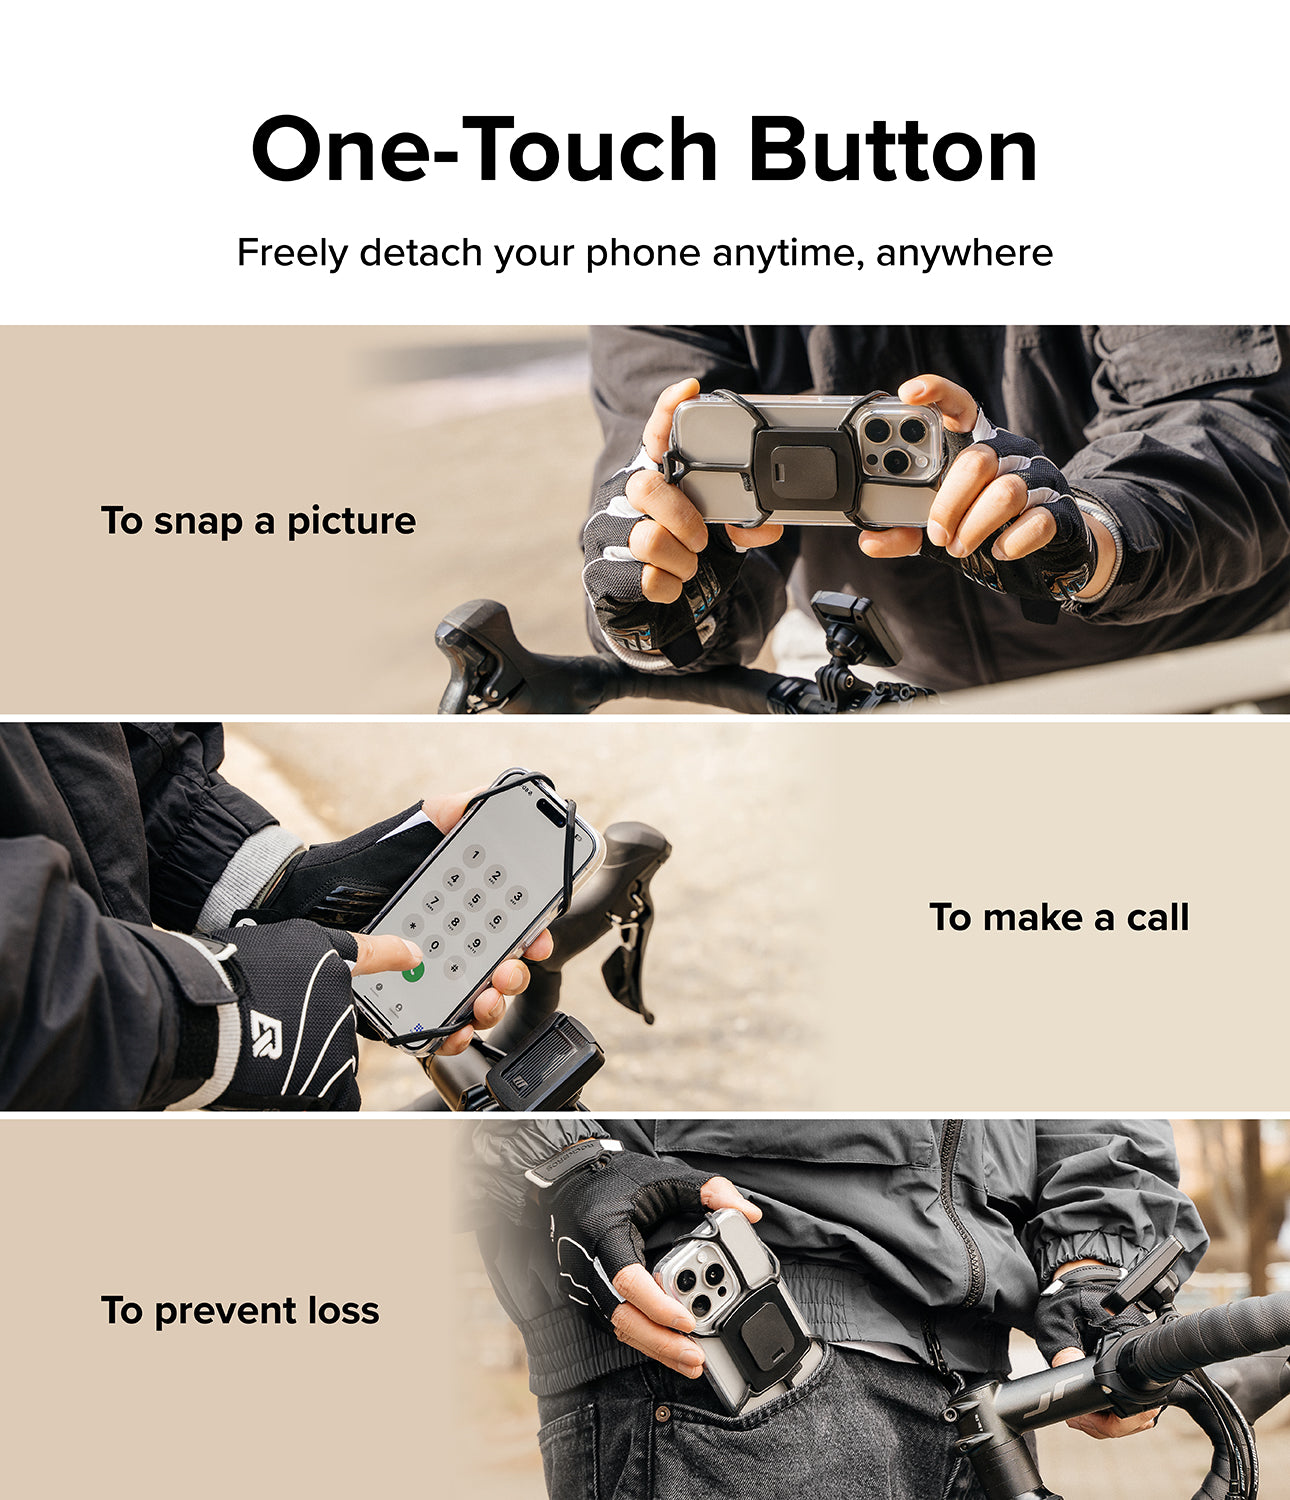 Quick & Go | Grip Bike Mount - One-Touch Button. Freely detach your phone anytime, anywhere. 